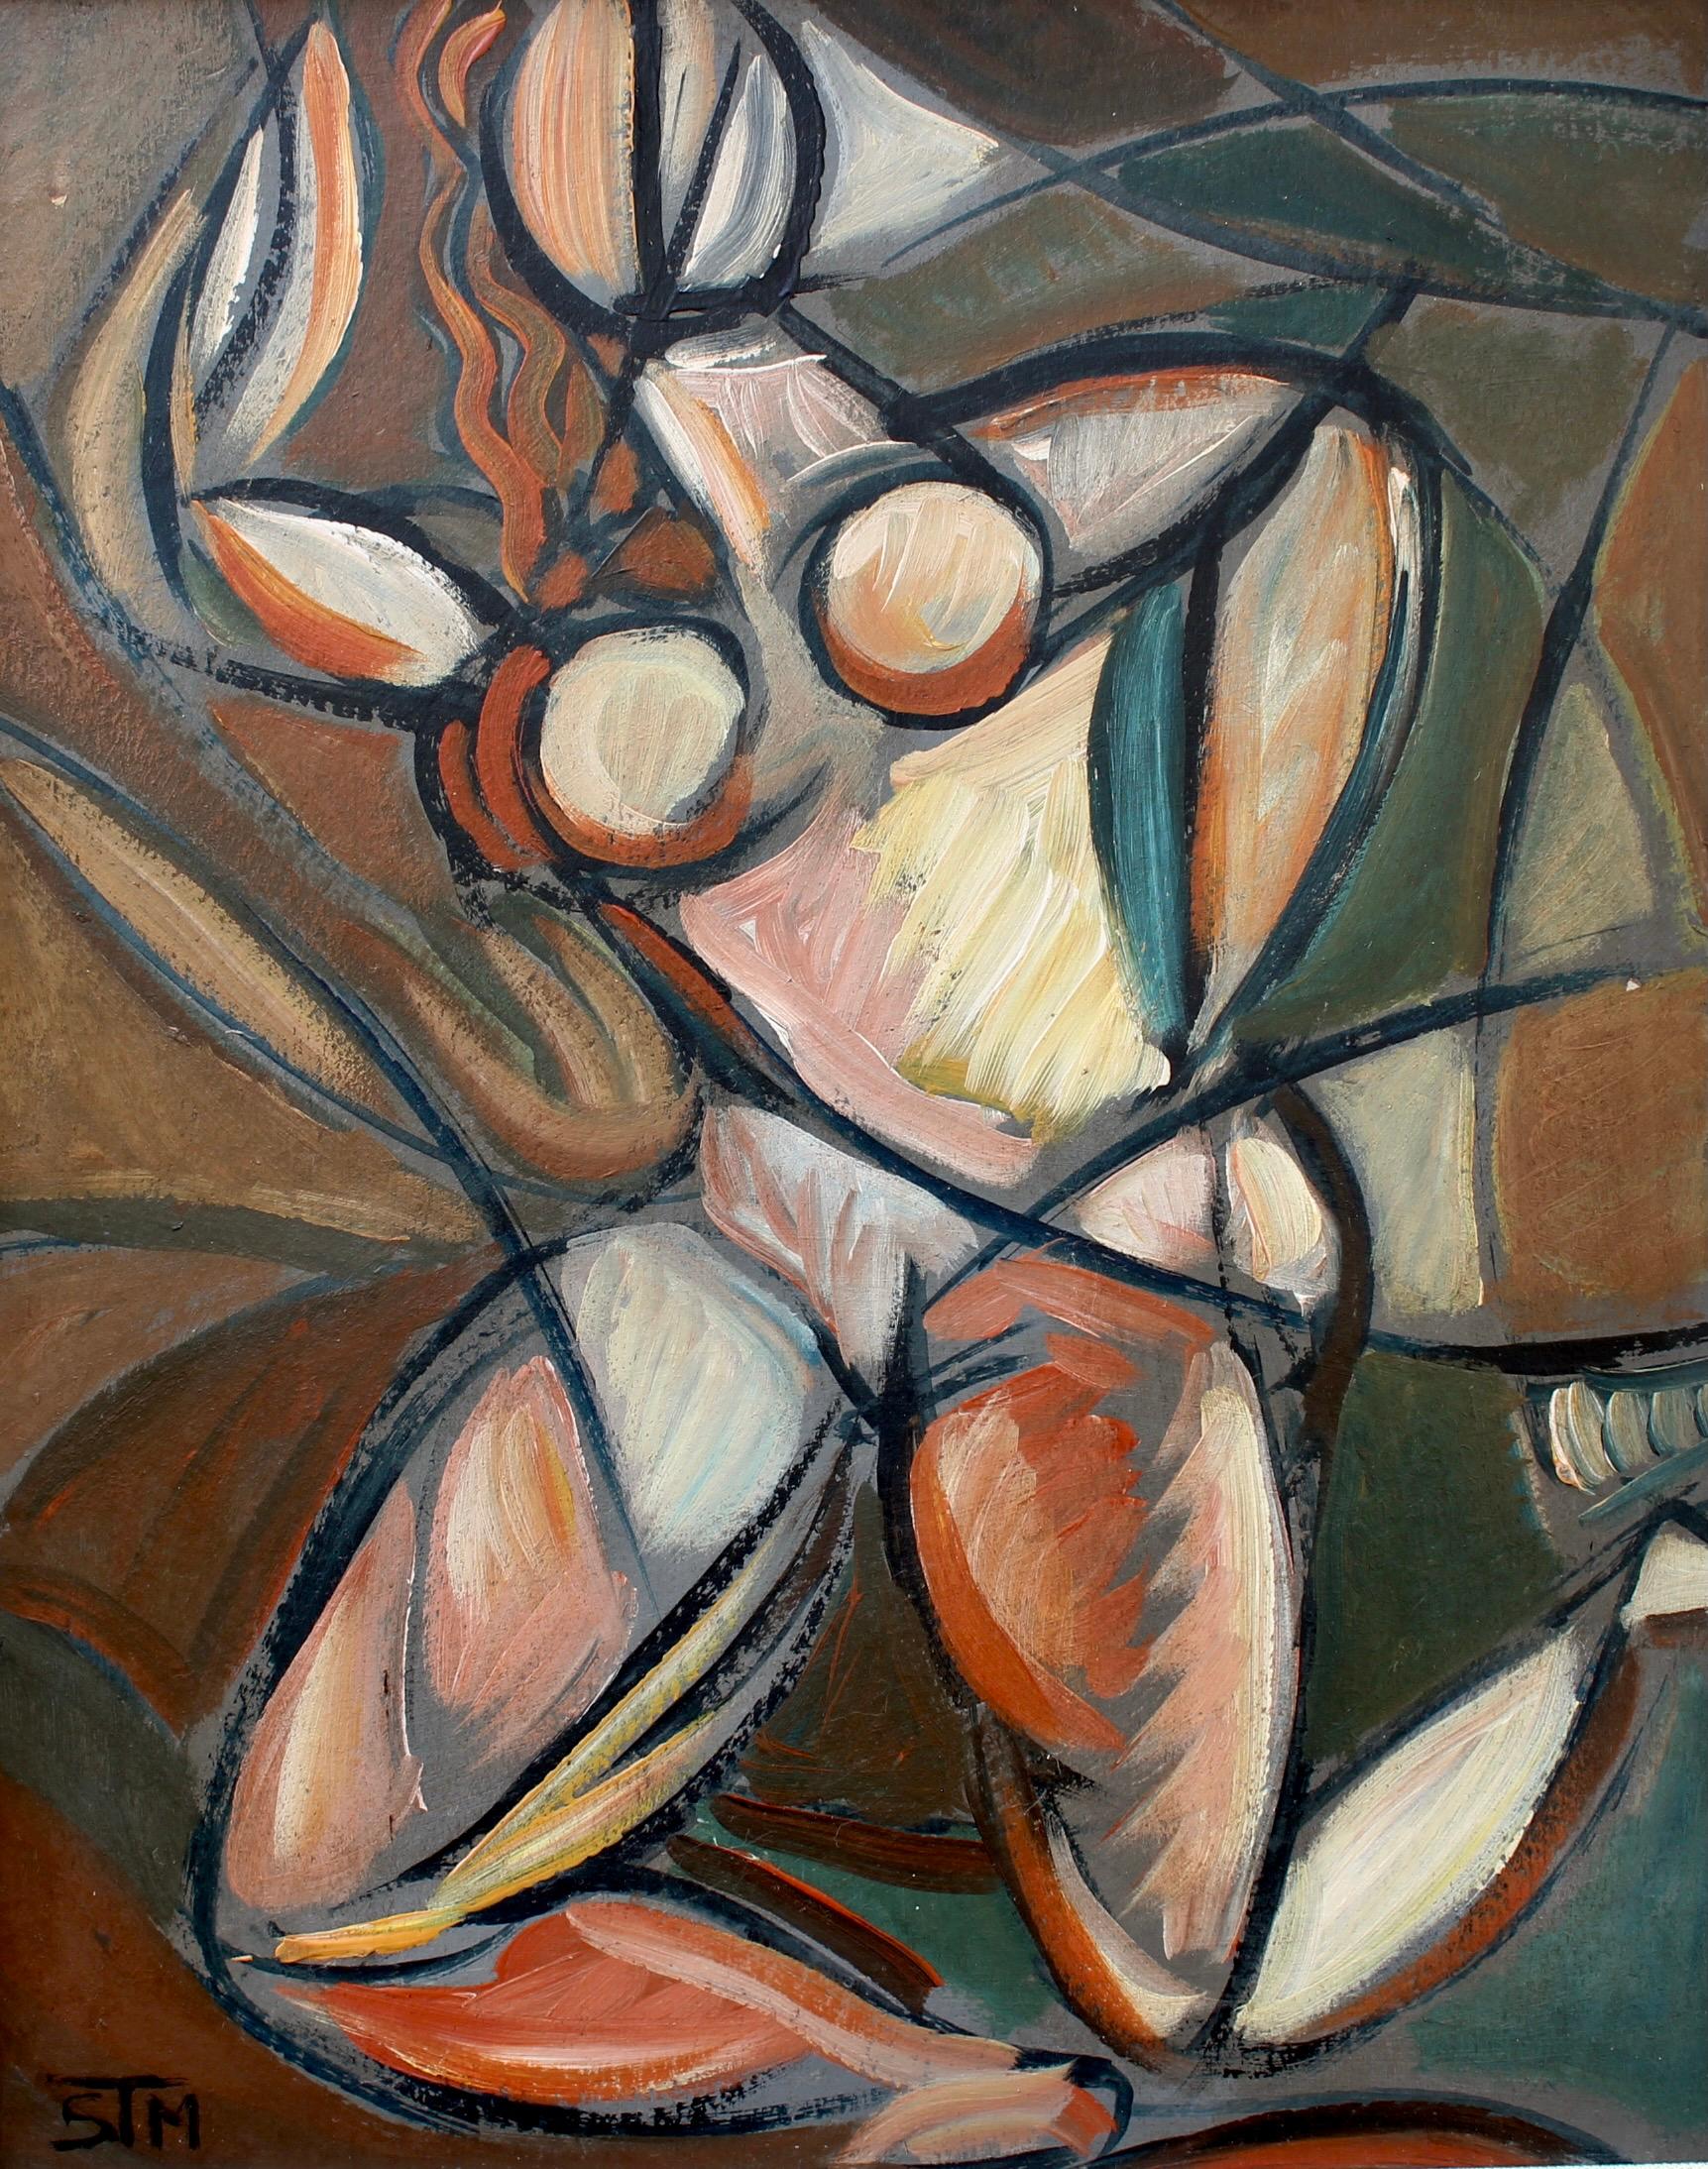 STM Abstract Painting - Untitled Cubist Figure